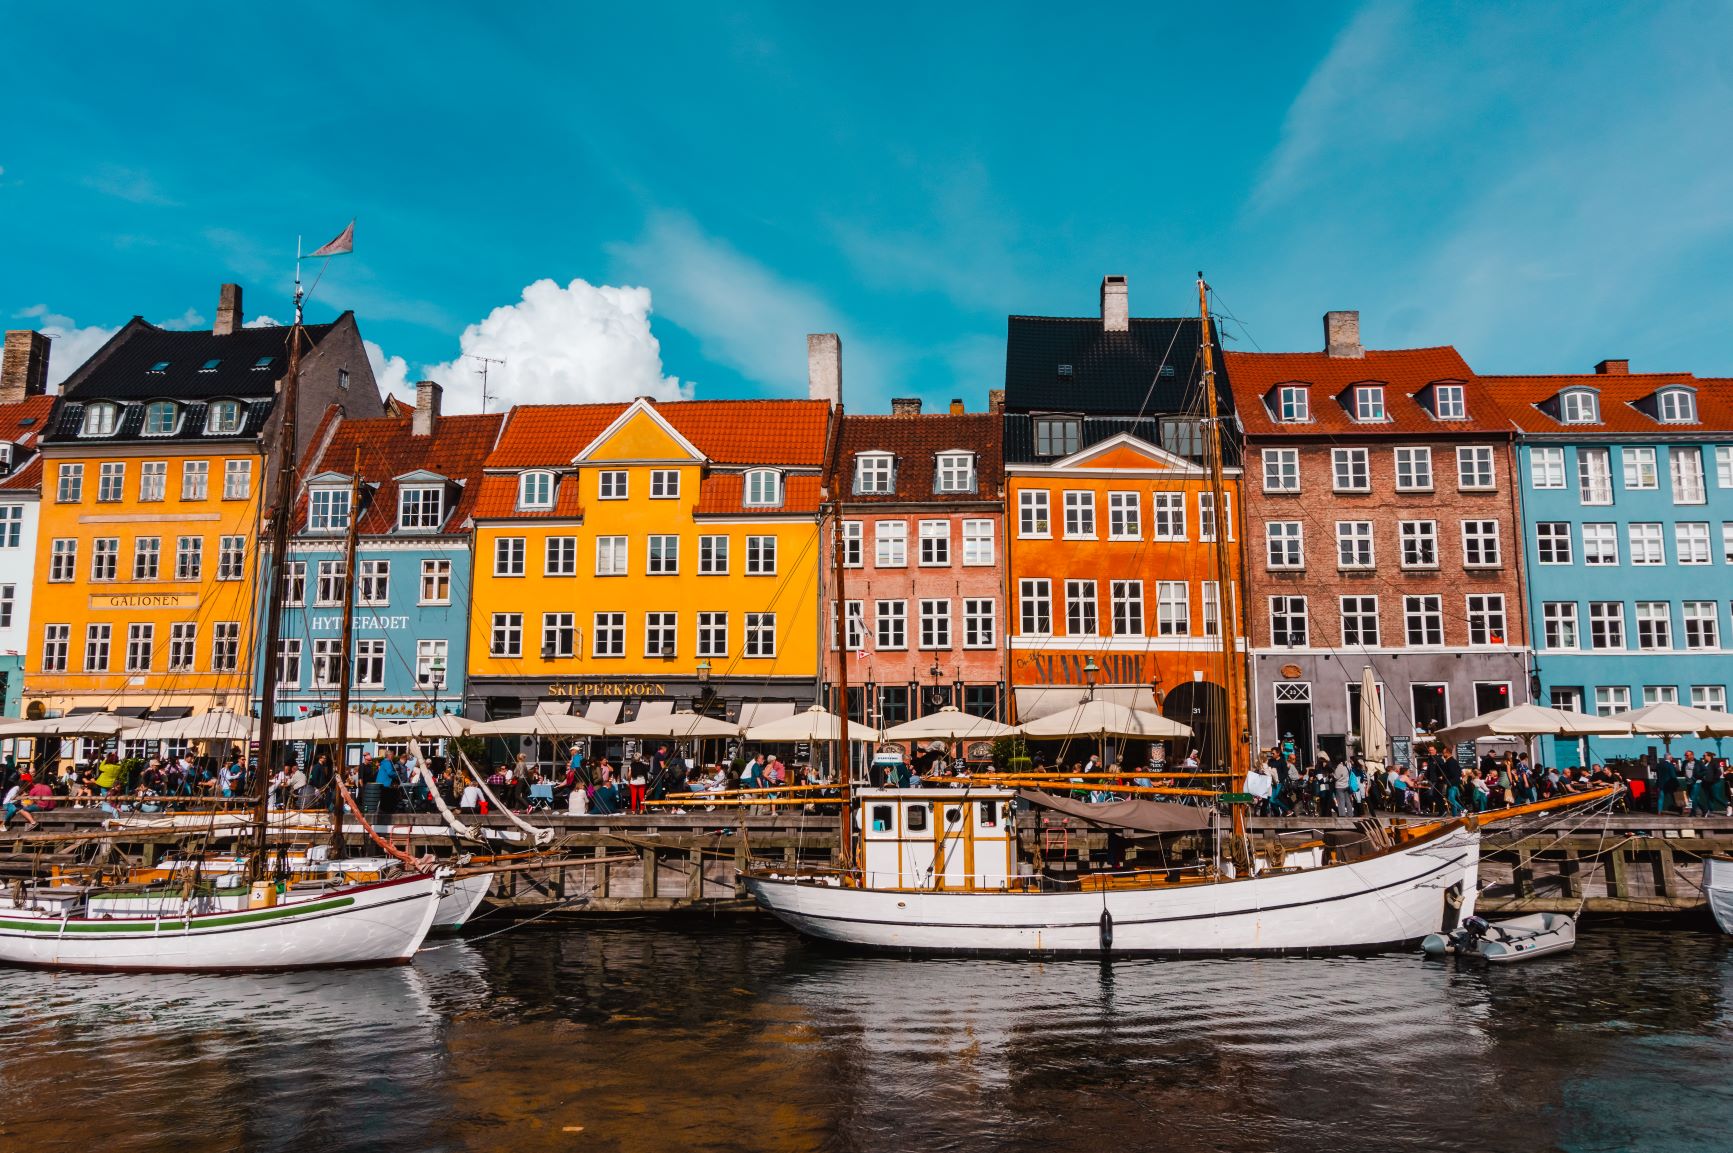 The colourful waterfront buildings of Nyhavn in Copenhagen, one of the best solo travel destinations in Europe.